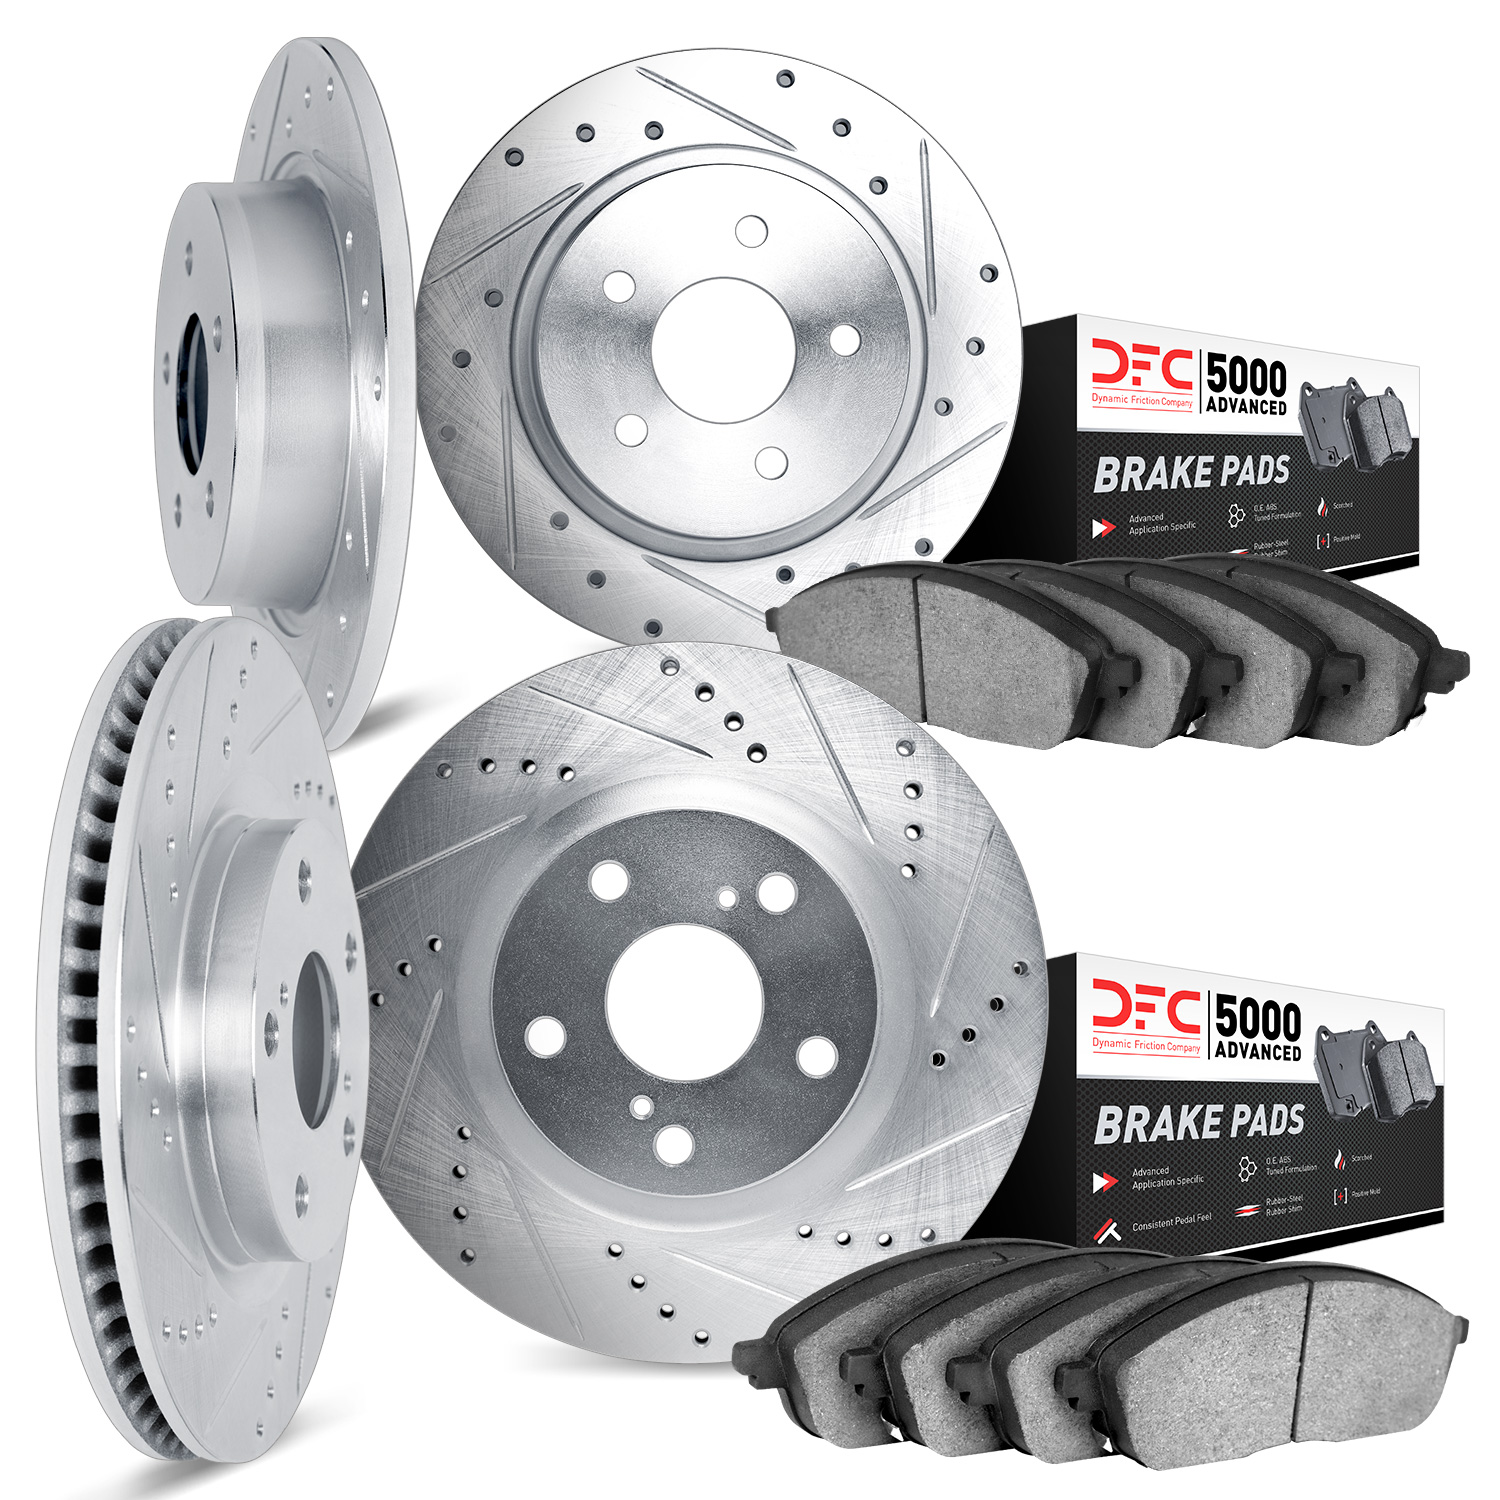 7504-32013 Drilled/Slotted Brake Rotors w/5000 Advanced Brake Pads Kit [Silver], Fits Select Mini, Position: Front and Rear